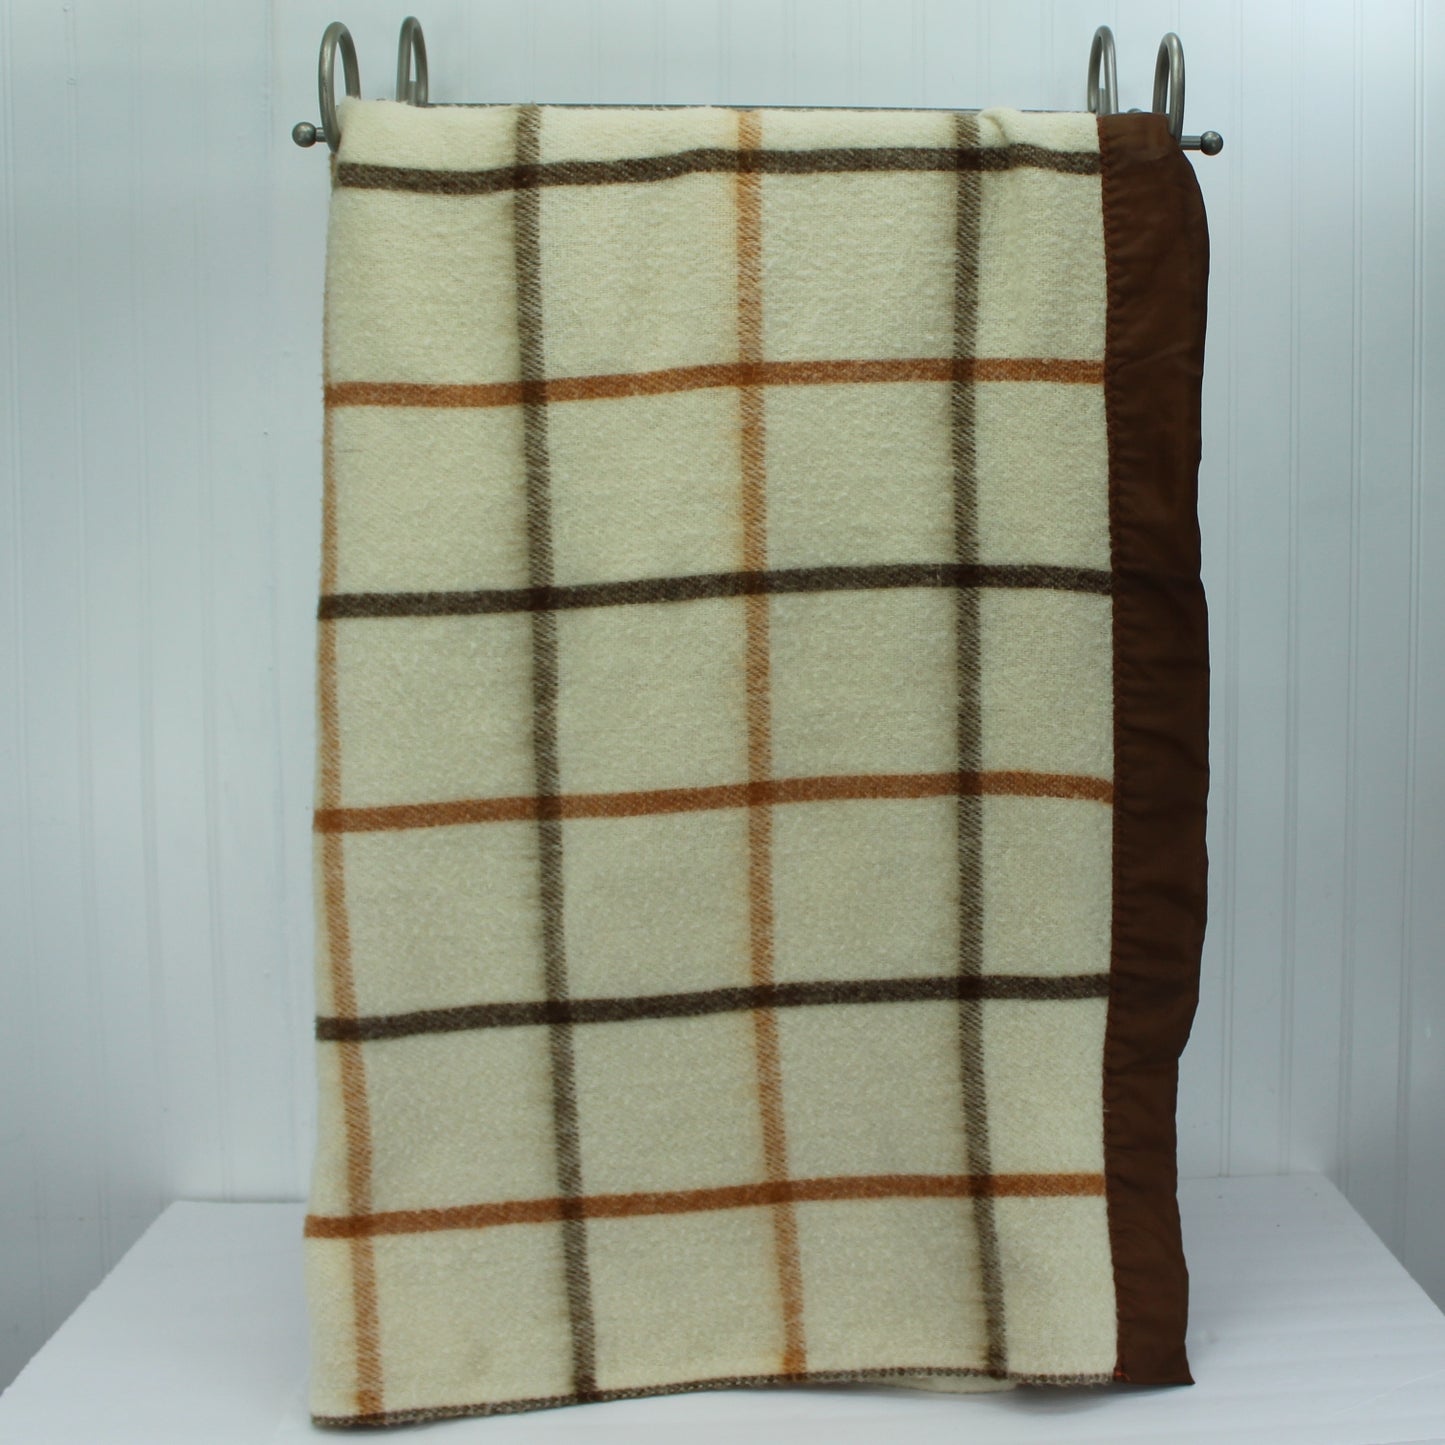 Unbranded Acrylic Blanket Cream Shades of Brown Block Design - 70" X 86" folded view showing pattern